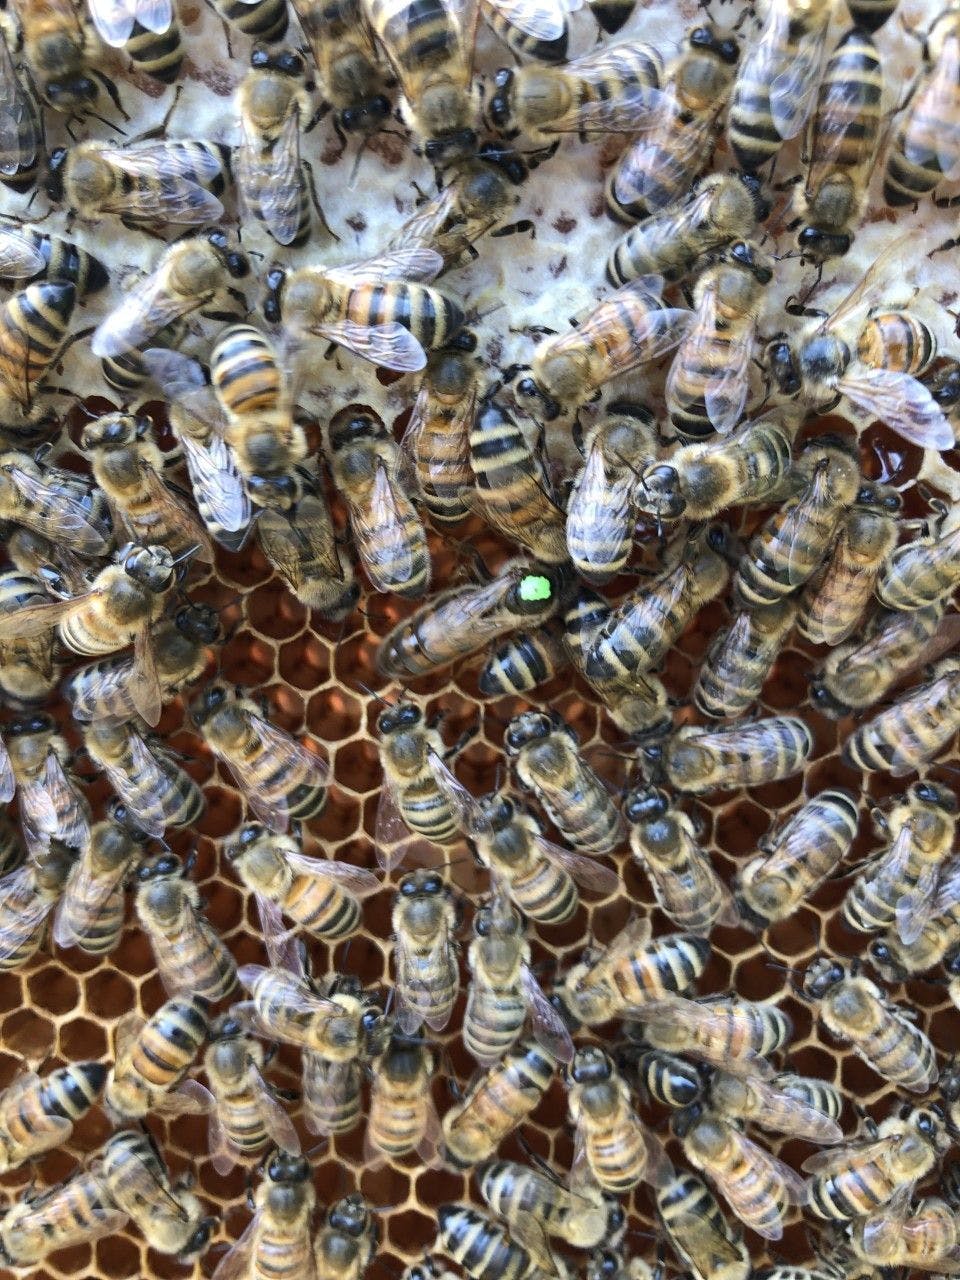 The queen bee, identified here with a green dot on her thorax, lays all the eggs for the colony. Research is showing that a vaccinated queen can pass pathogen-associated molecular pattern molecules in the egg protein vitellogenin via a process known as transgenerational immune priming.